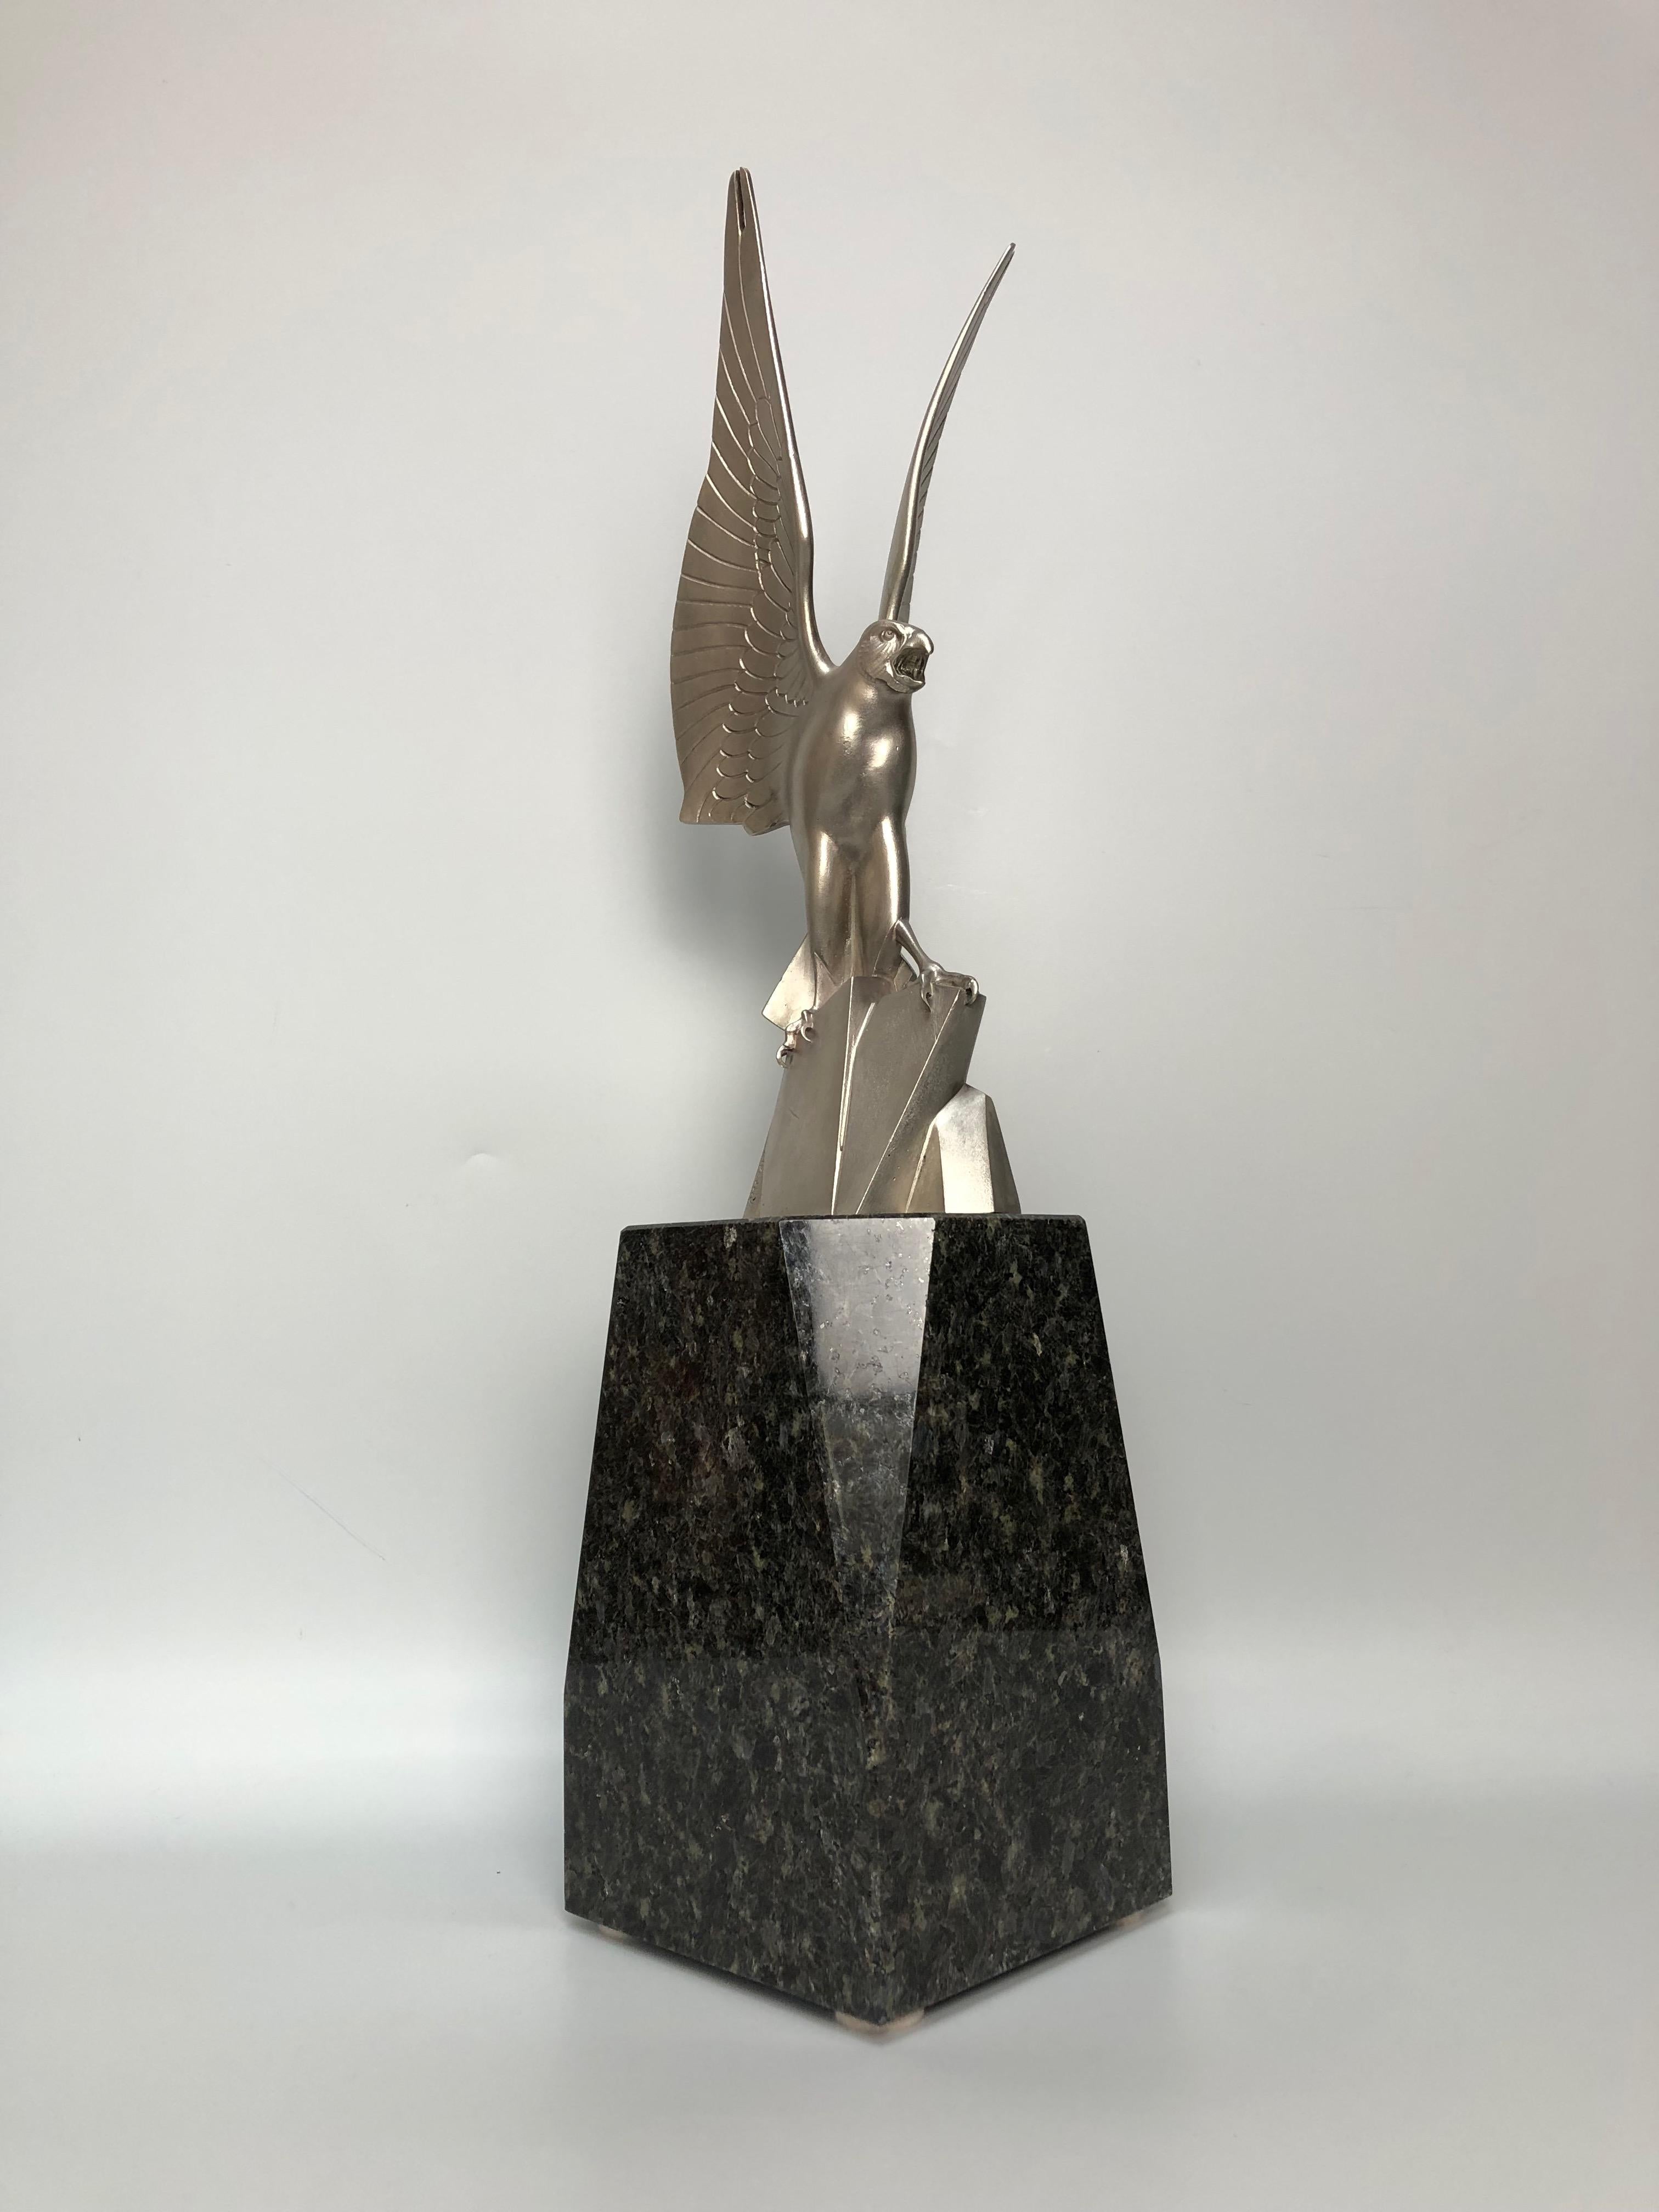 Silvered bronze circa 1930.
Eagle on a rock mounted on a marble base.
Signed Rischmann.

Eagle height: 31.5 cm
Total height: 52 cm
Width: 13 cm
Depth: 13 cm
Weight: 10Kg

Henri Rischmann was well known for his silvered and polychromed animalia